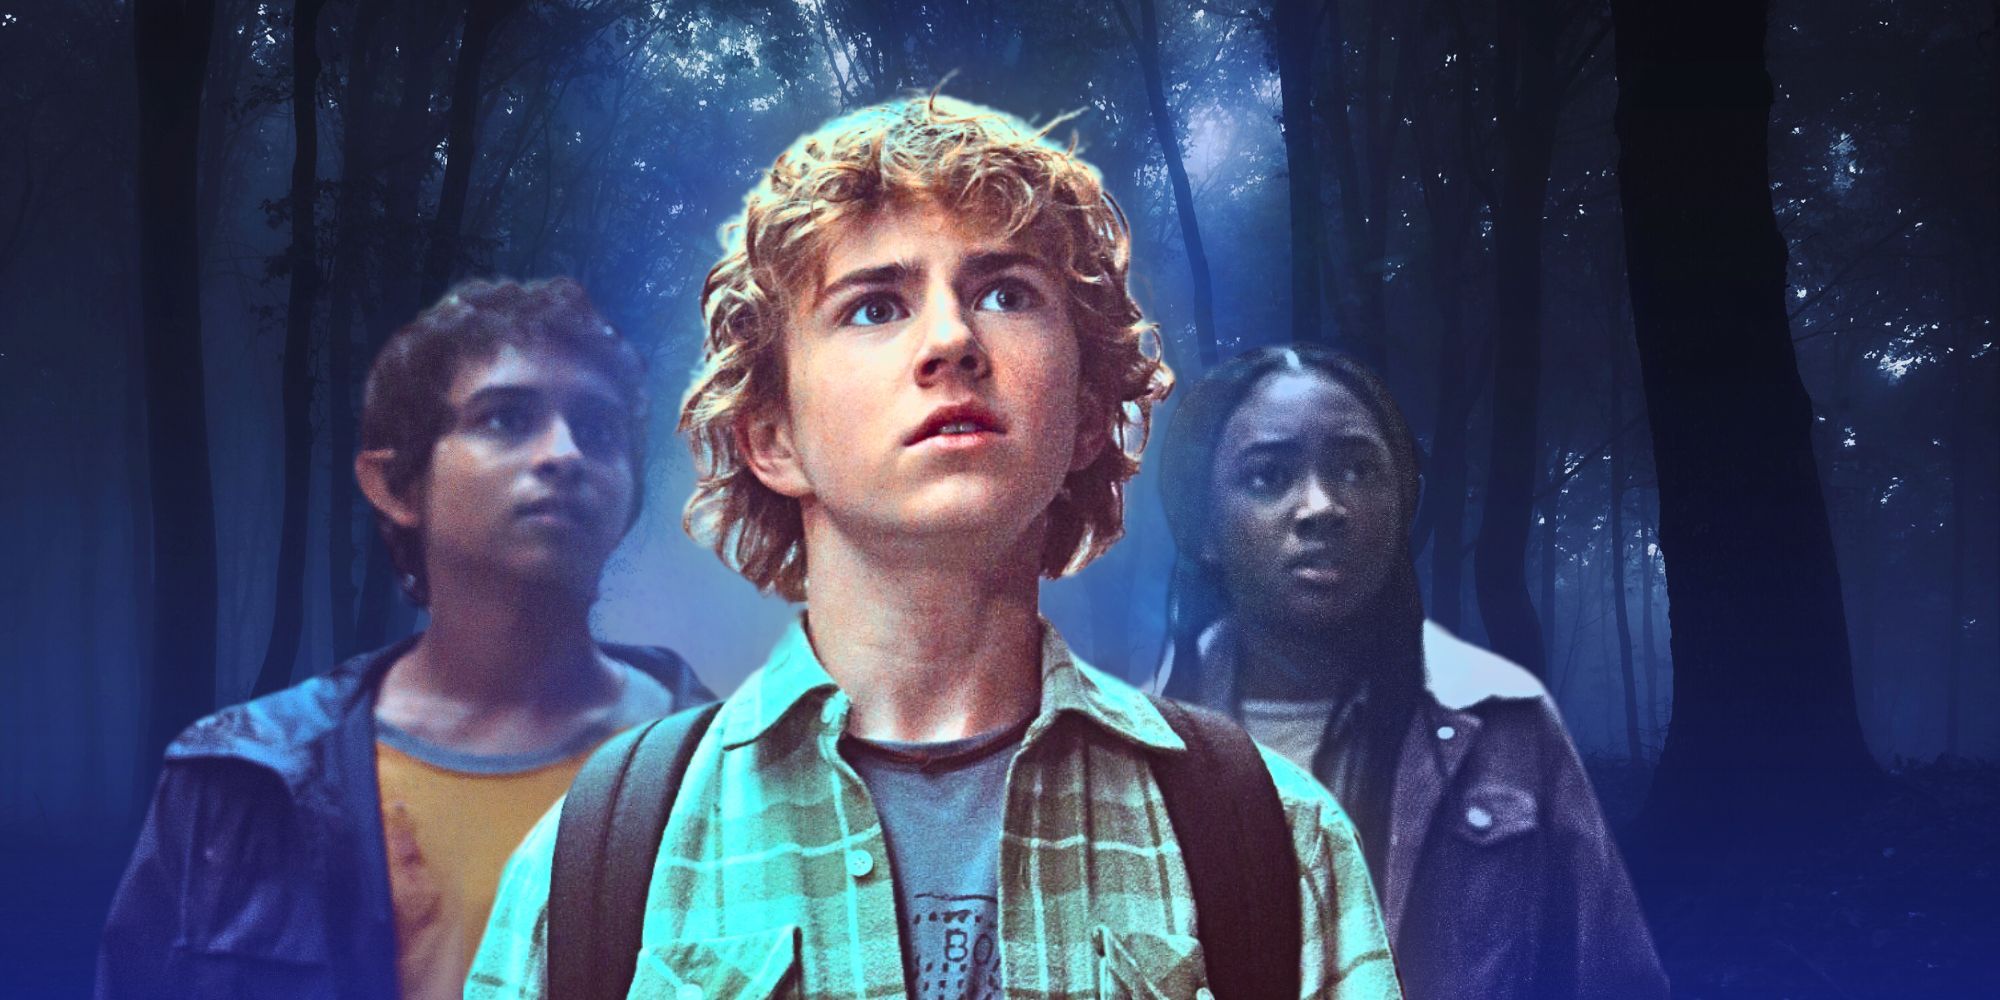 Grover, Percy, and Annabeth looking worried in a foggy forest in Percy Jackson and the Olympians